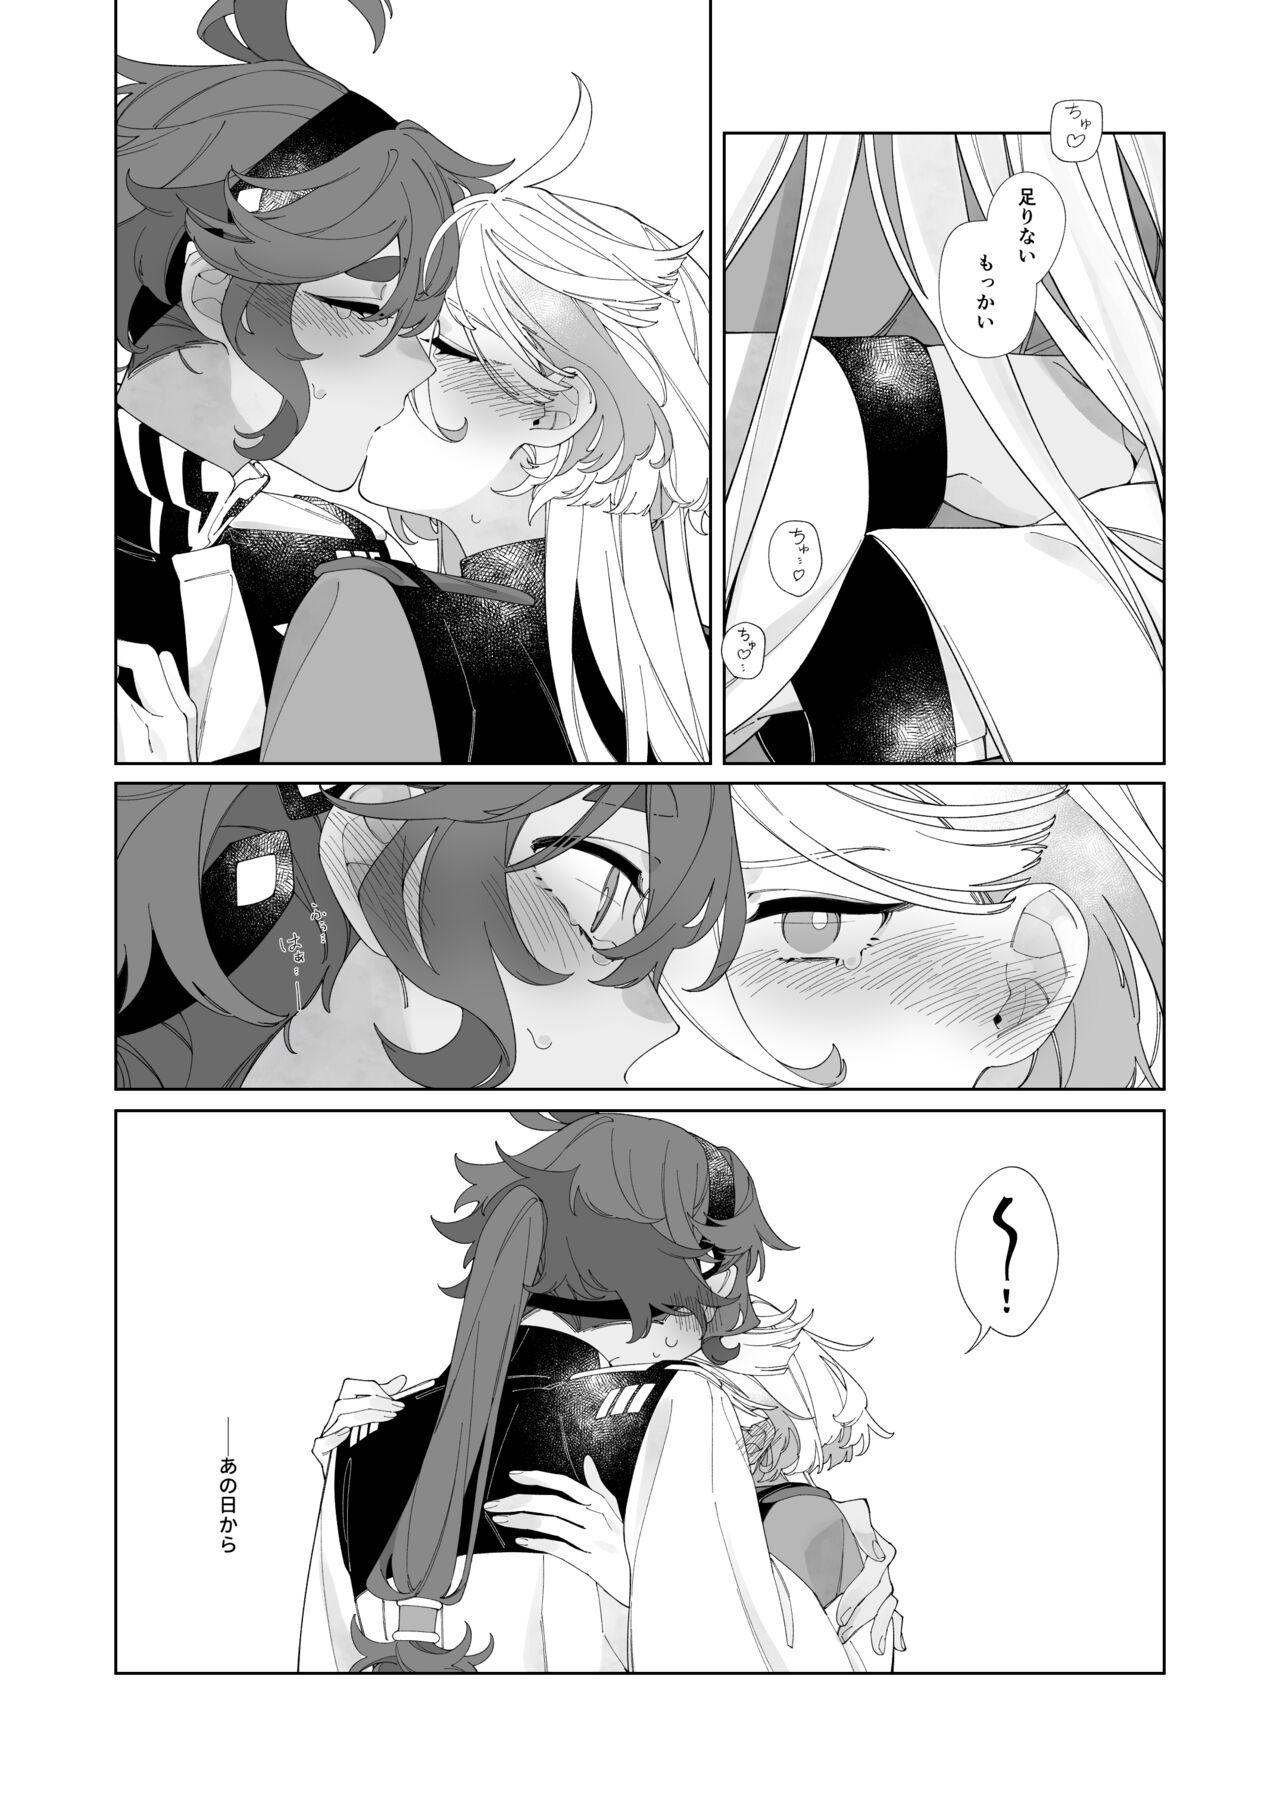 Gay College Kiss no Ato Nani ga Shitai? - After kissing, what else do you want to do? - Mobile suit gundam the witch from mercury Femdom Pov - Page 8